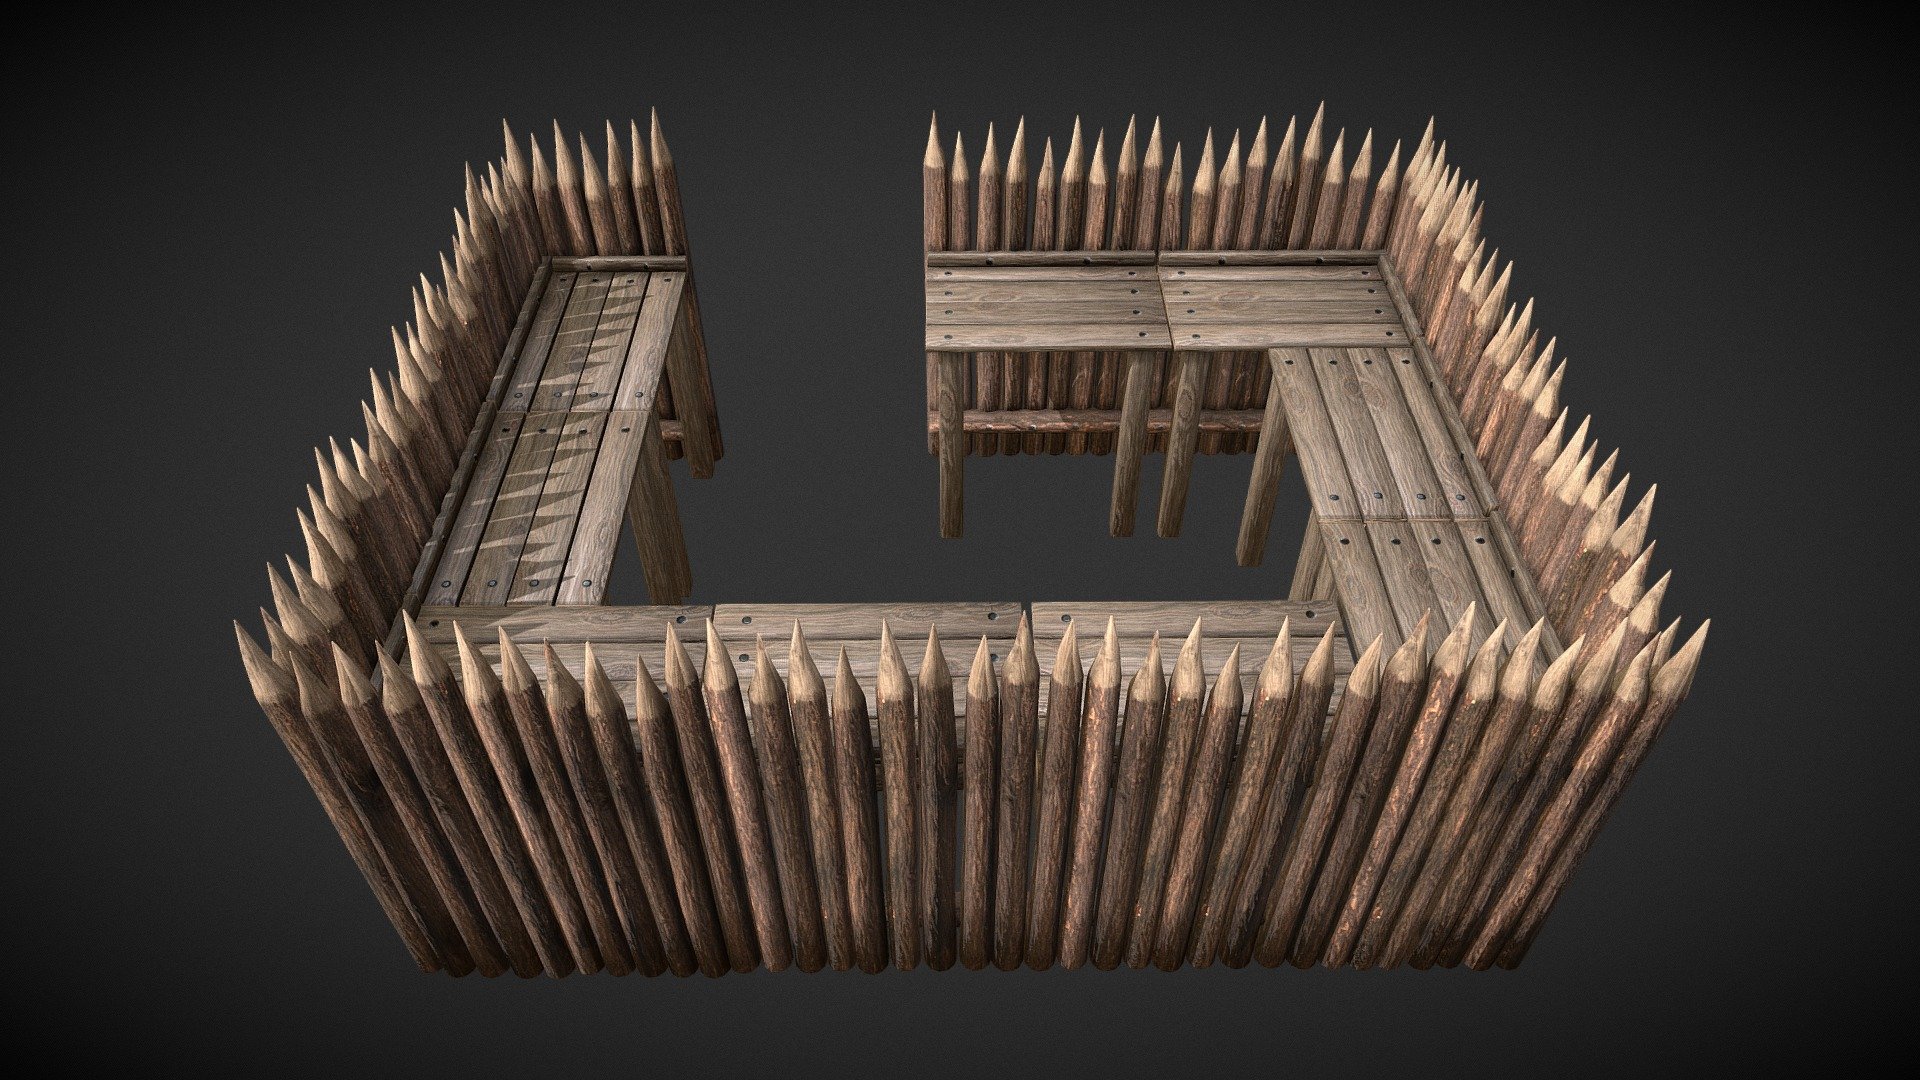 Medieval Wooden Palisade 4k - Model/Art by Outworld Studios

Must give credit to Outworld Studios if using the asset.

Show support by joining my discord: https://discord.gg/EgWSkp8Cxn - Medieval Wooden Palisade 4k - Buy Royalty Free 3D model by Outworld Studios (@outworldstudios) 3d model